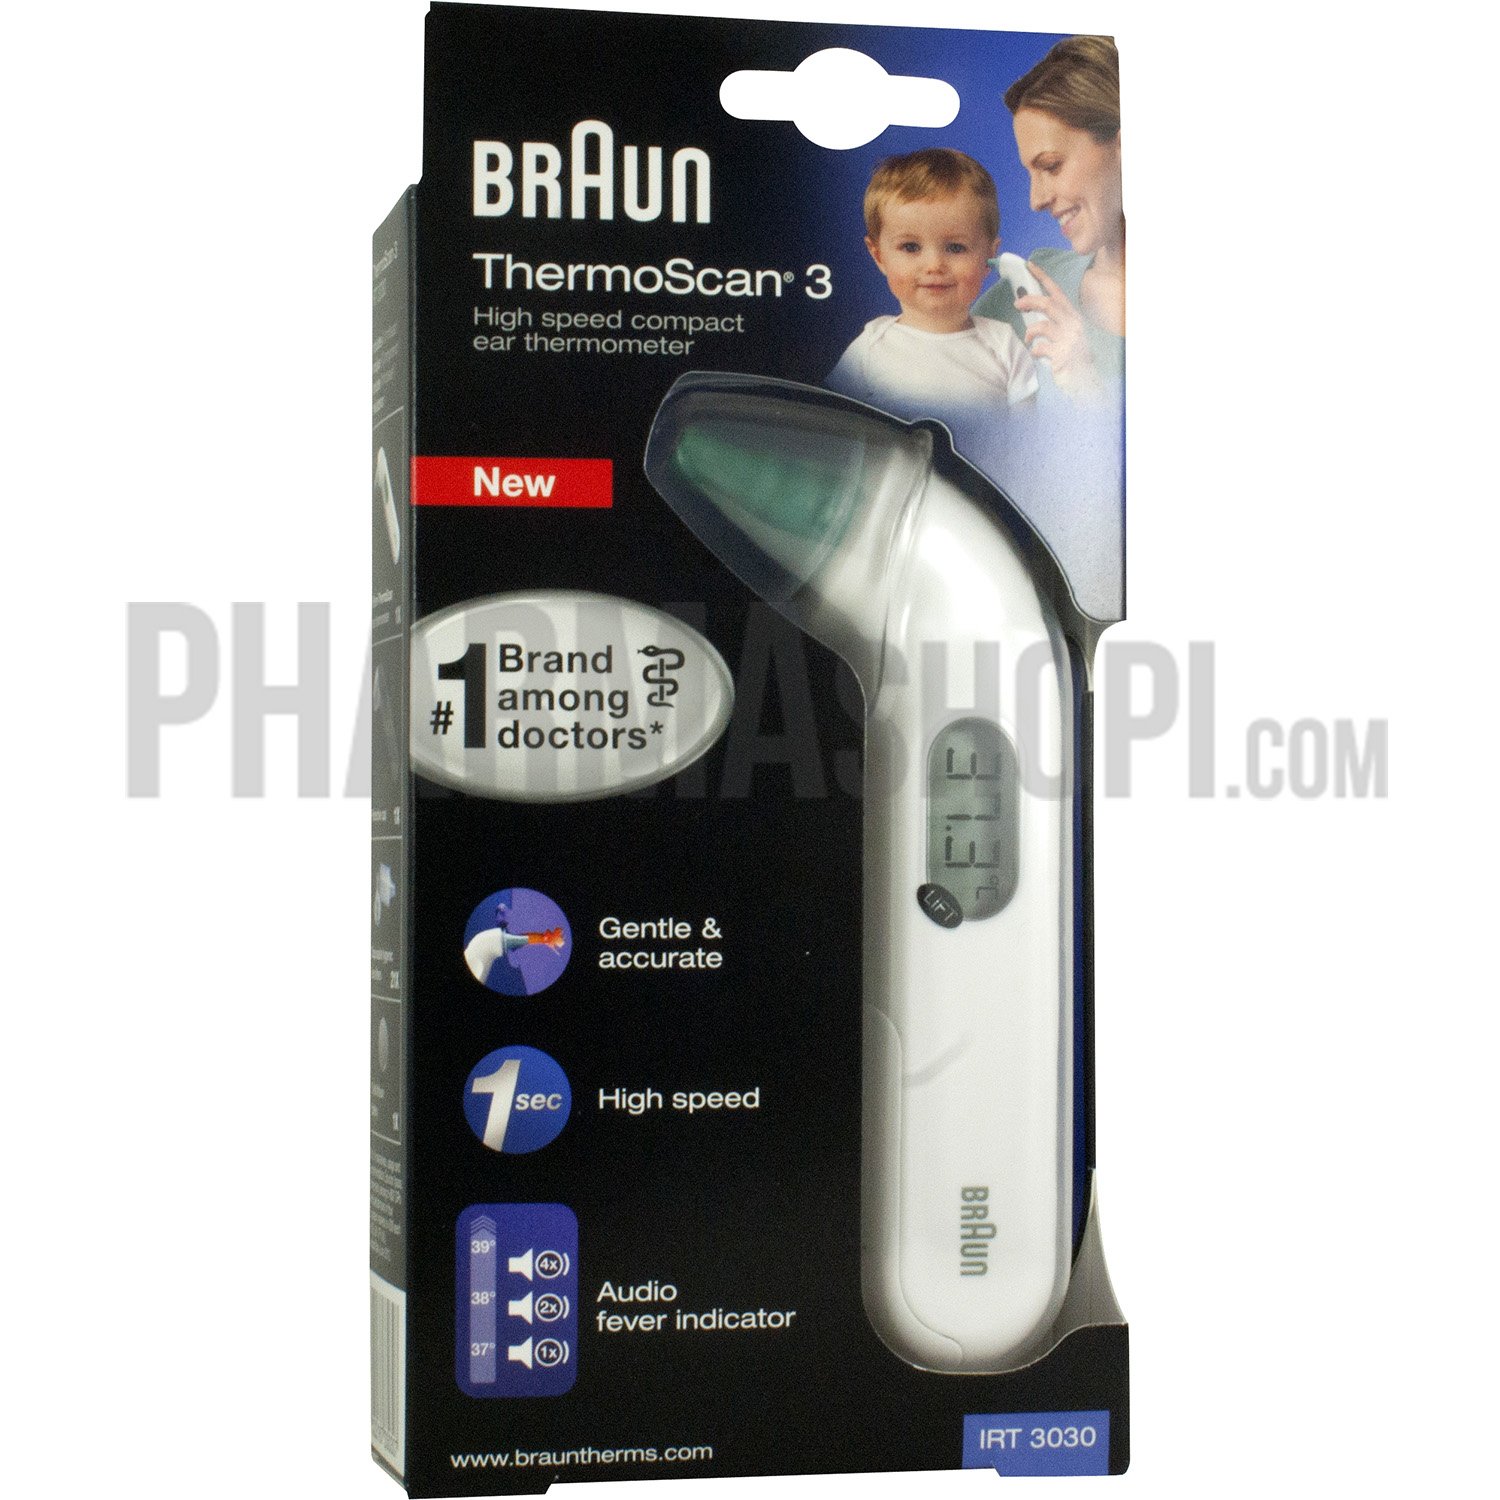 Thermoscan 3 thermomètre auriculaire compact IRT 3030 Braun - 1 thermomètre